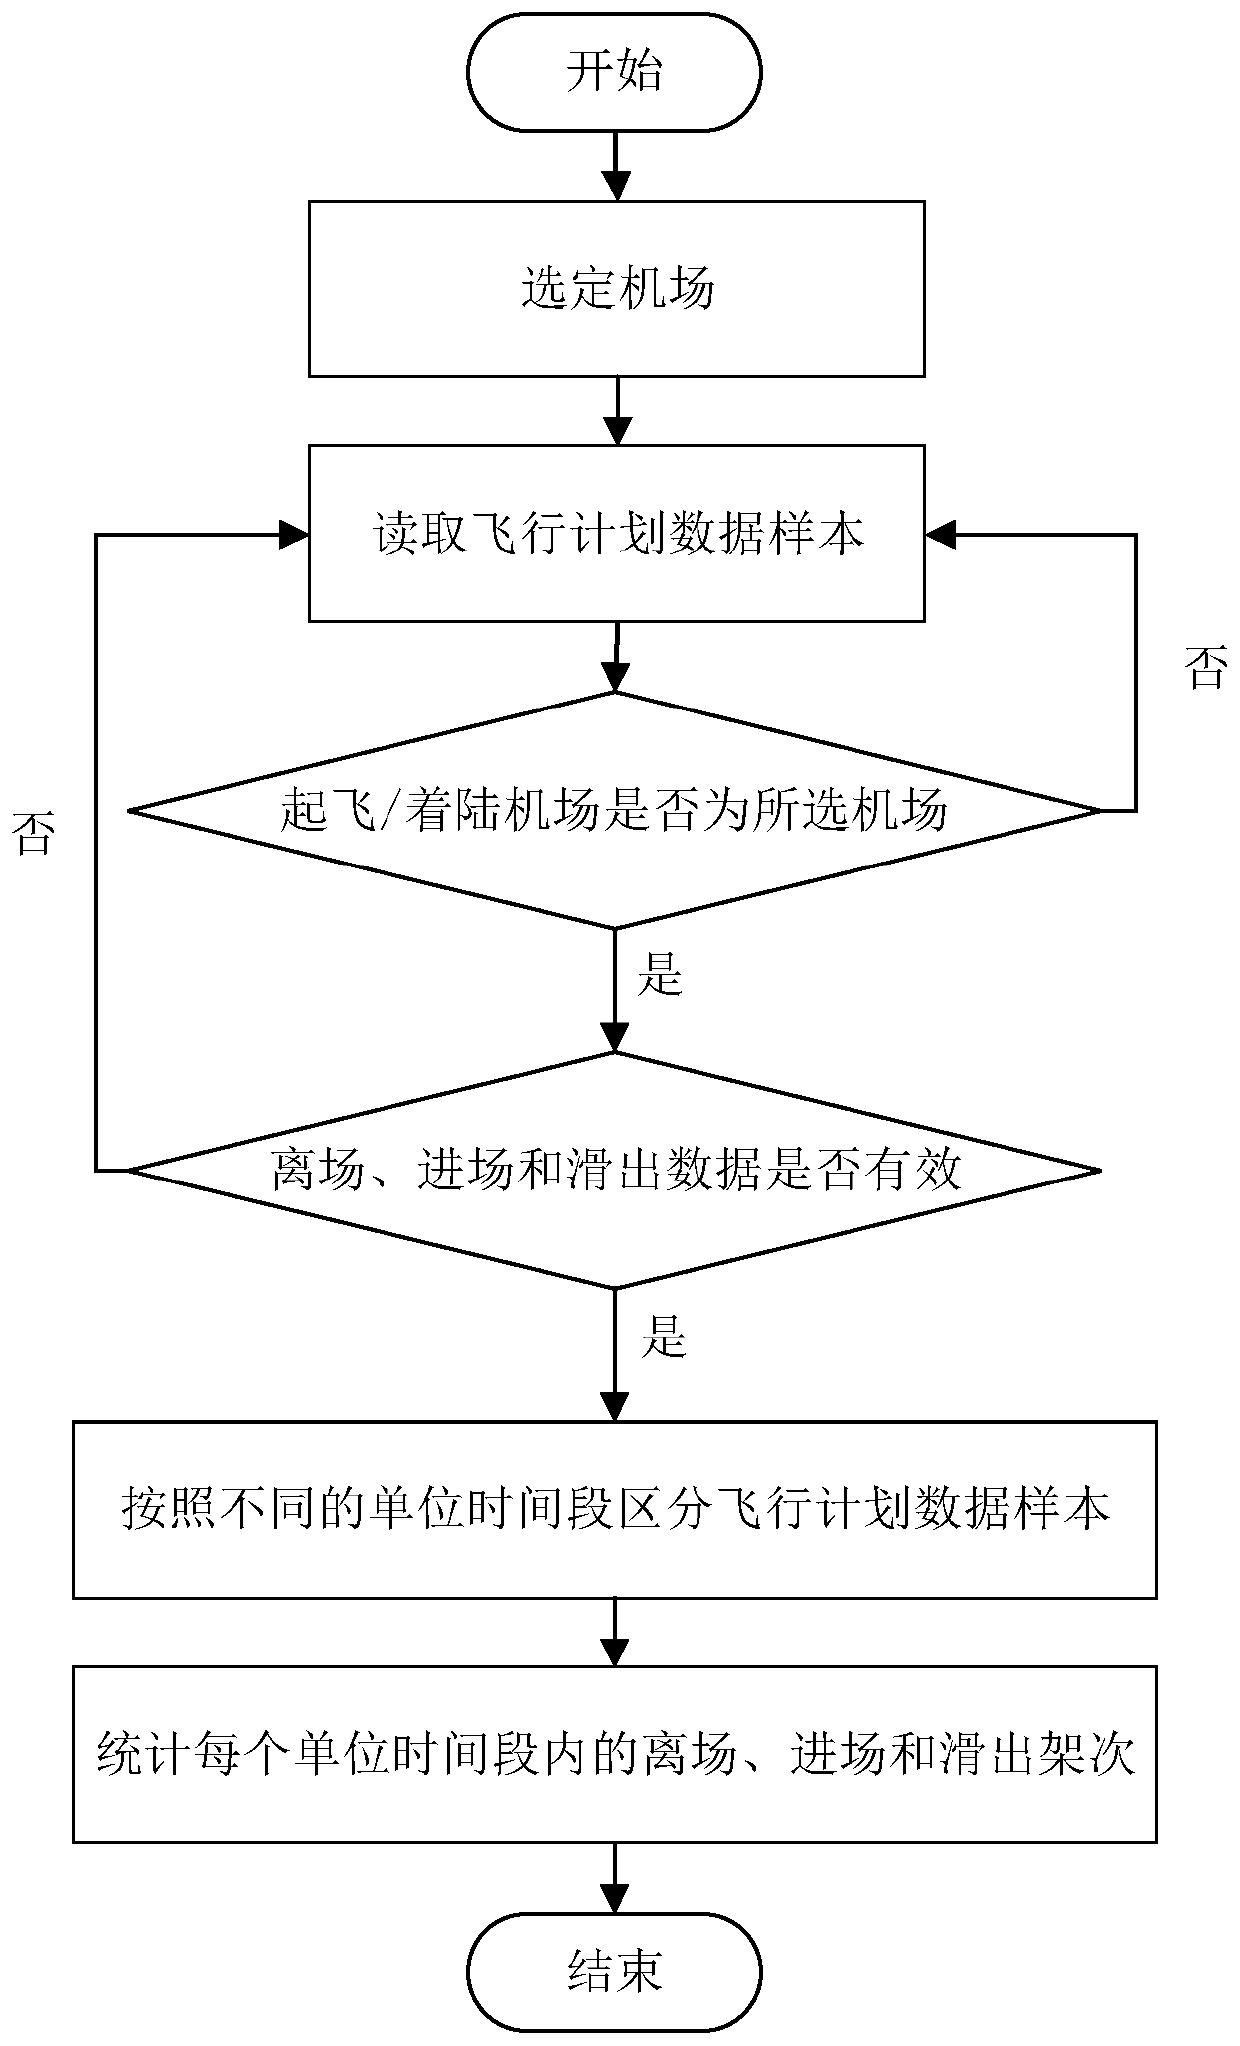 Method for evaluating airport publishing capacity by adopting historical operation data envelope lines